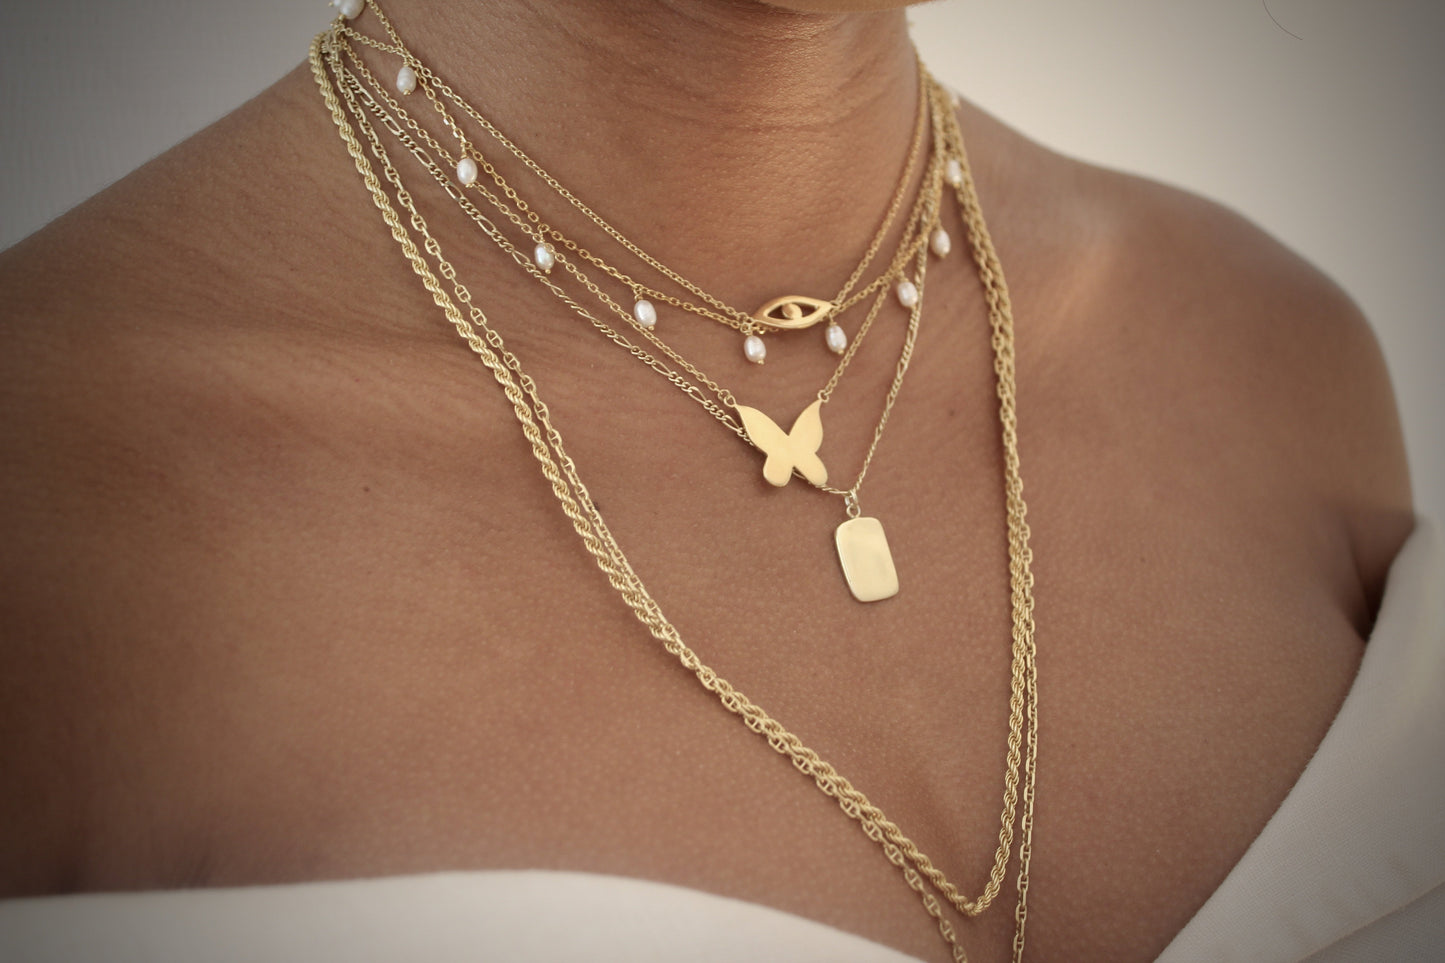 Dog tag necklace - you by me.